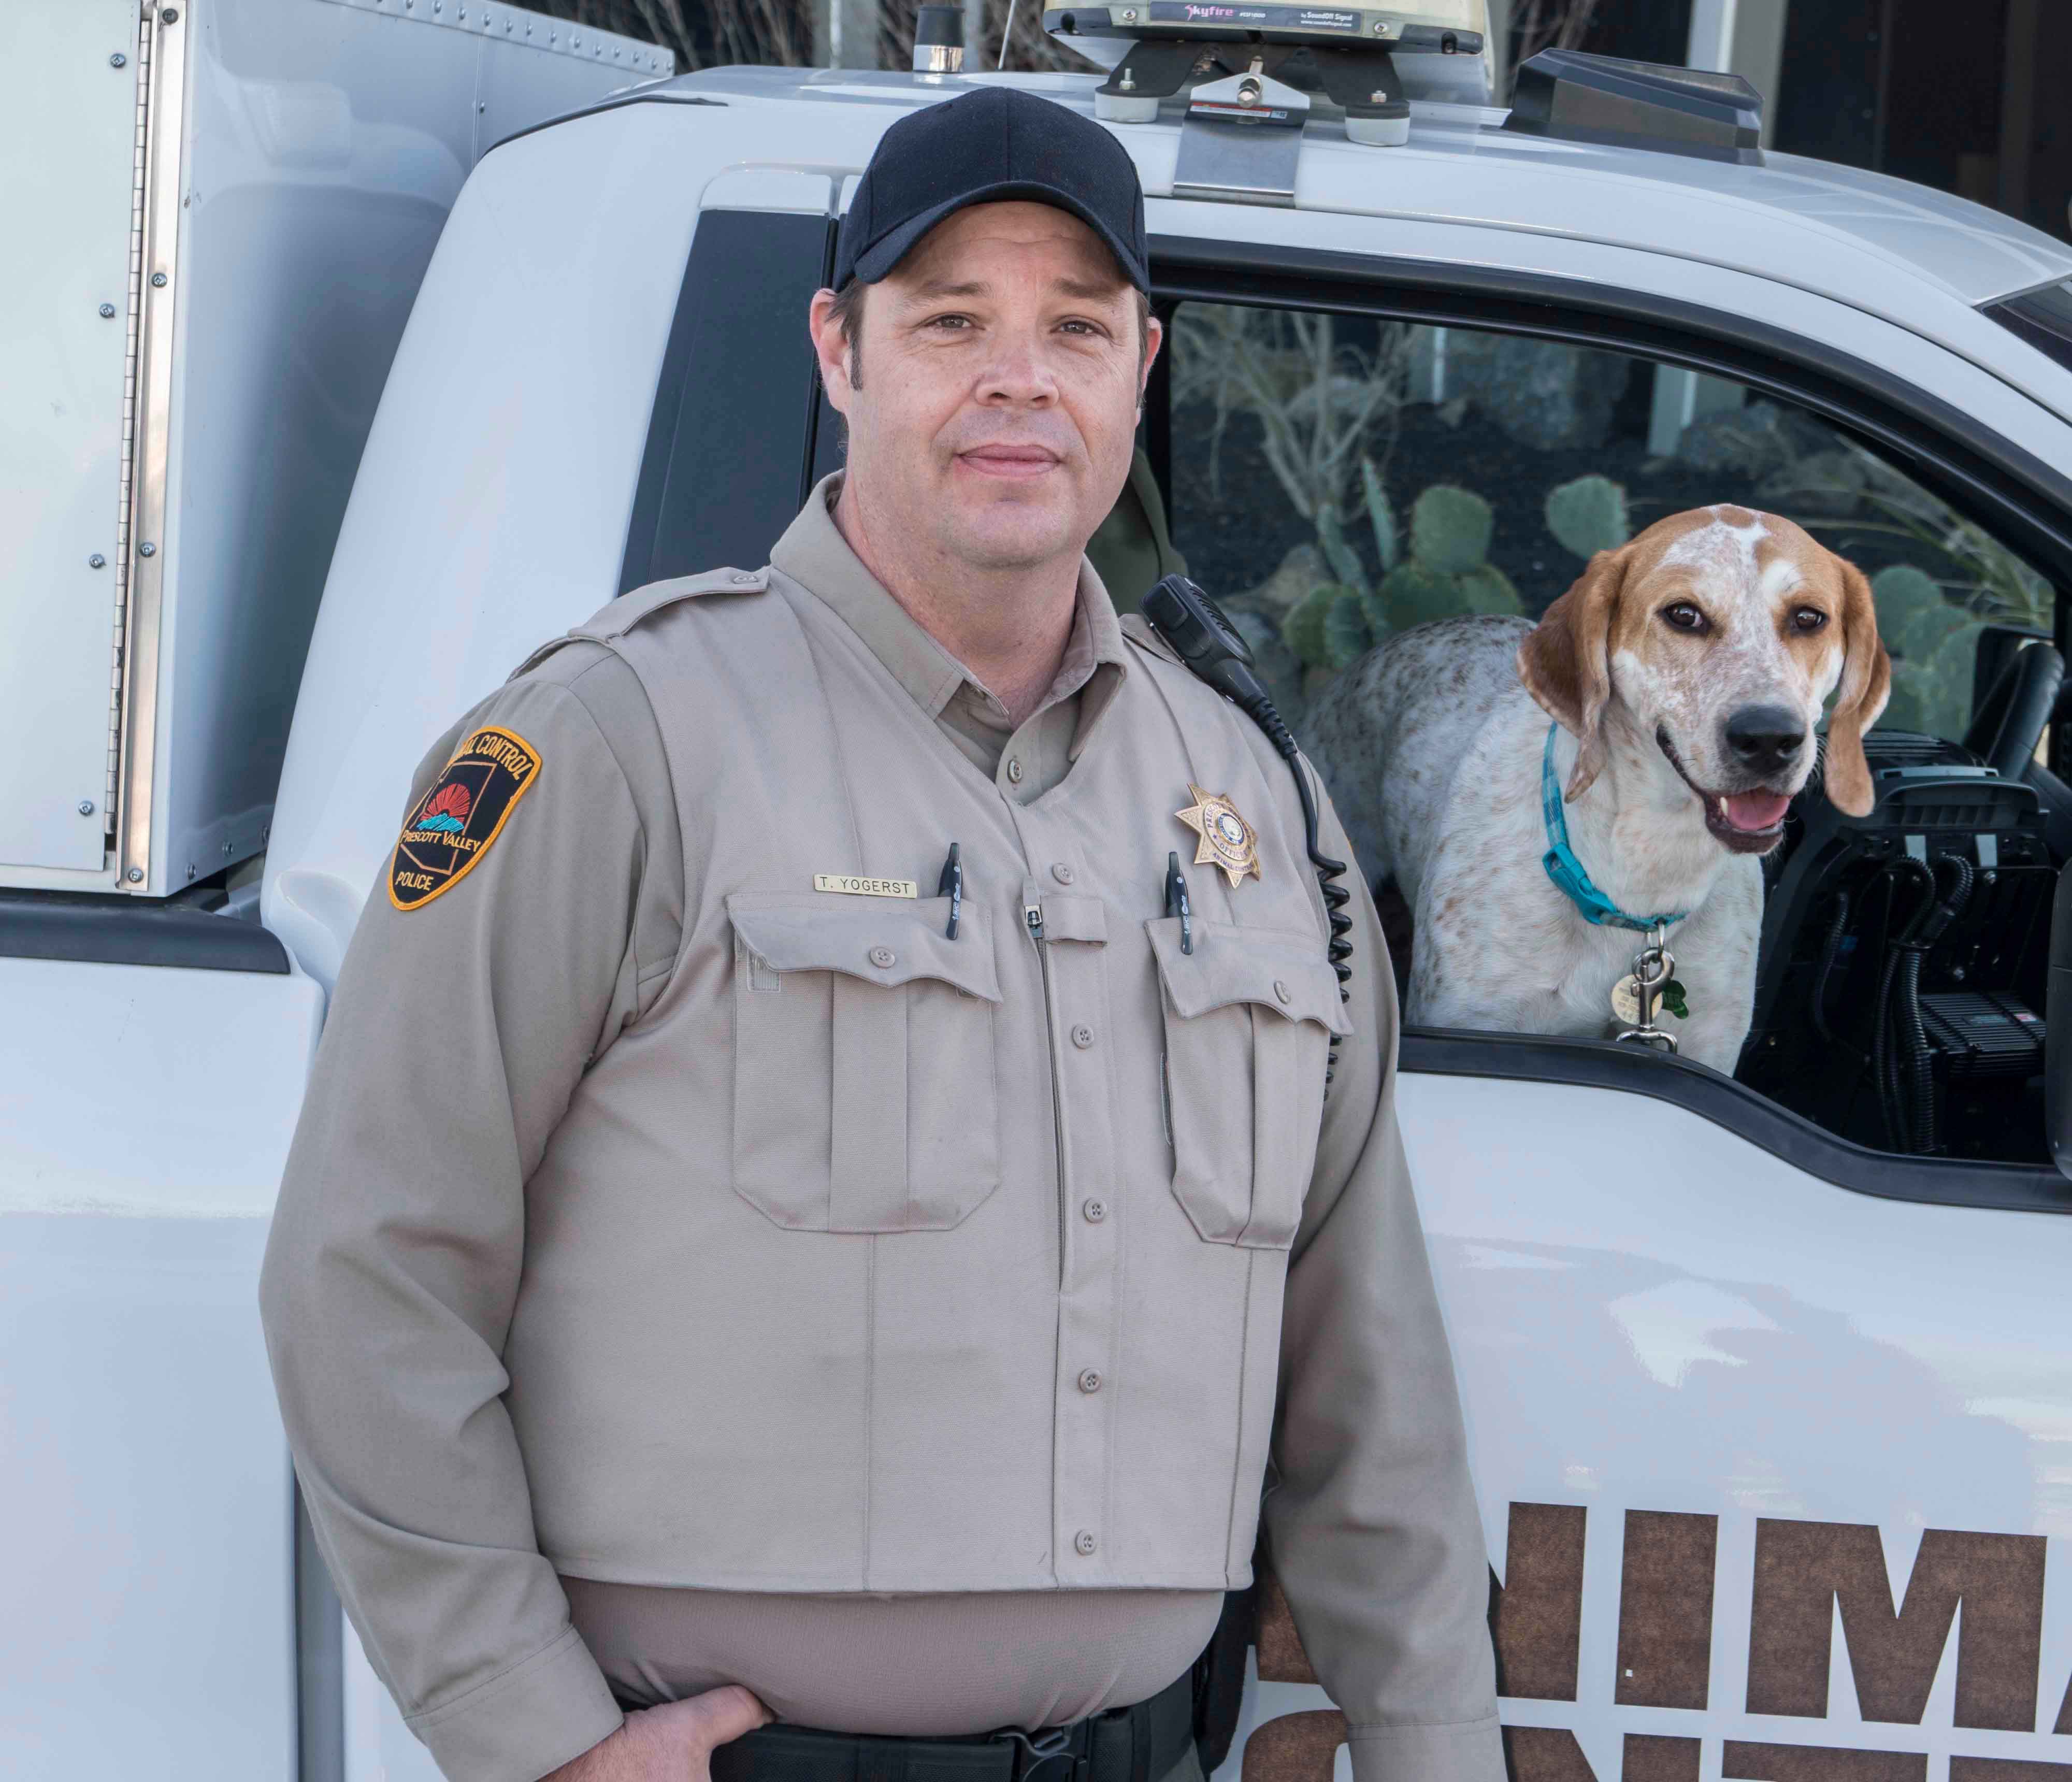 Prescott Valley PD s new Animal Control Officer off to a great start